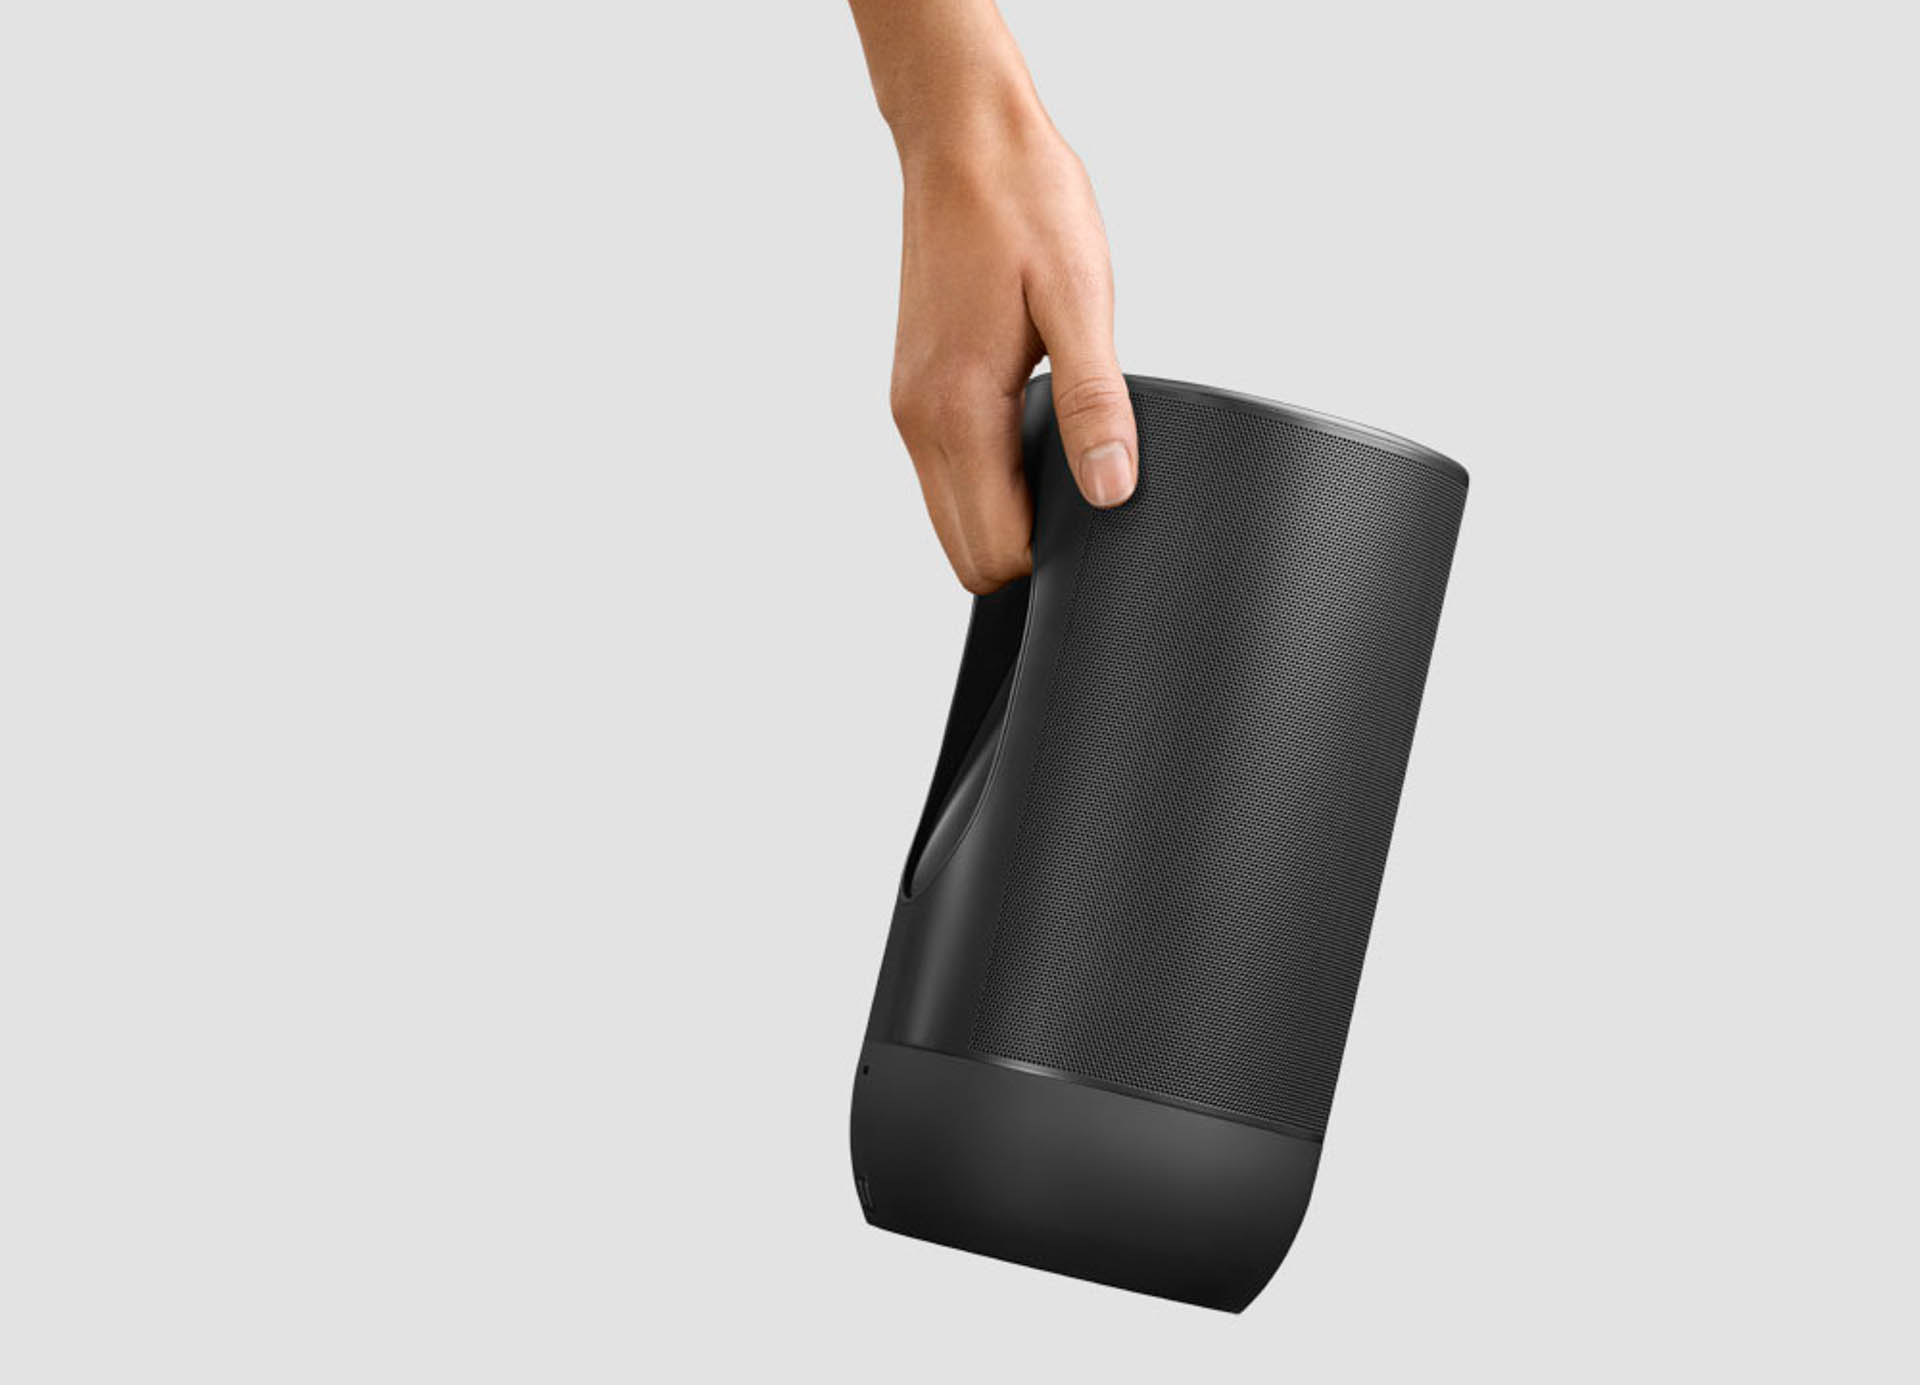 A built-in carry handle makes moving the 6.6-lb. Sonos Move speaker from inside to outside. You won't be easily tucking it into your carry bag, as it measures over 9-in. tall. Image: Sonos.